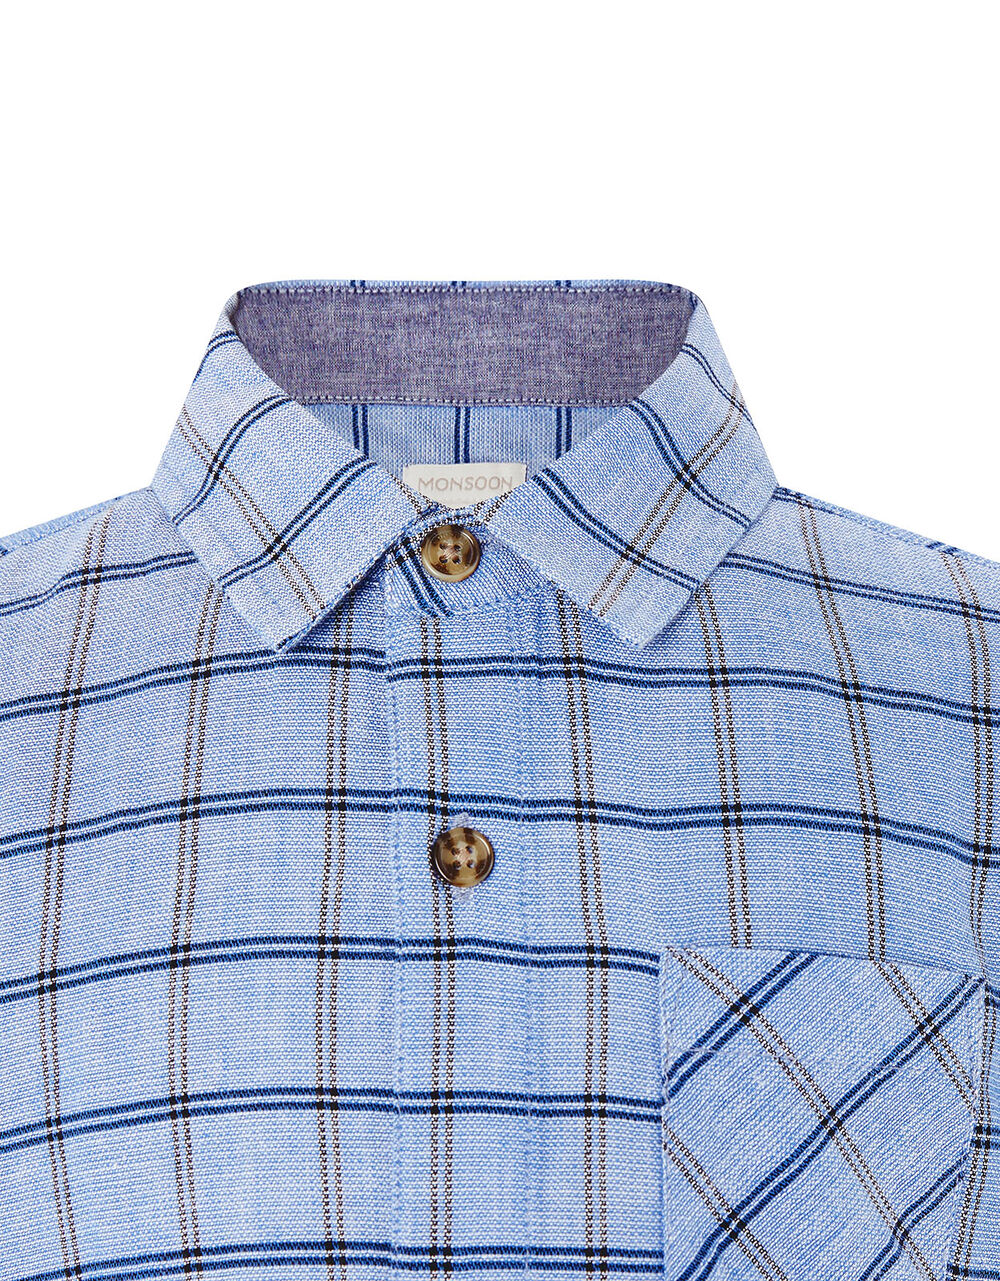 Check Short Sleeve Shirt in Pure Cotton Blue | Boys' Tops & T-shirts ...